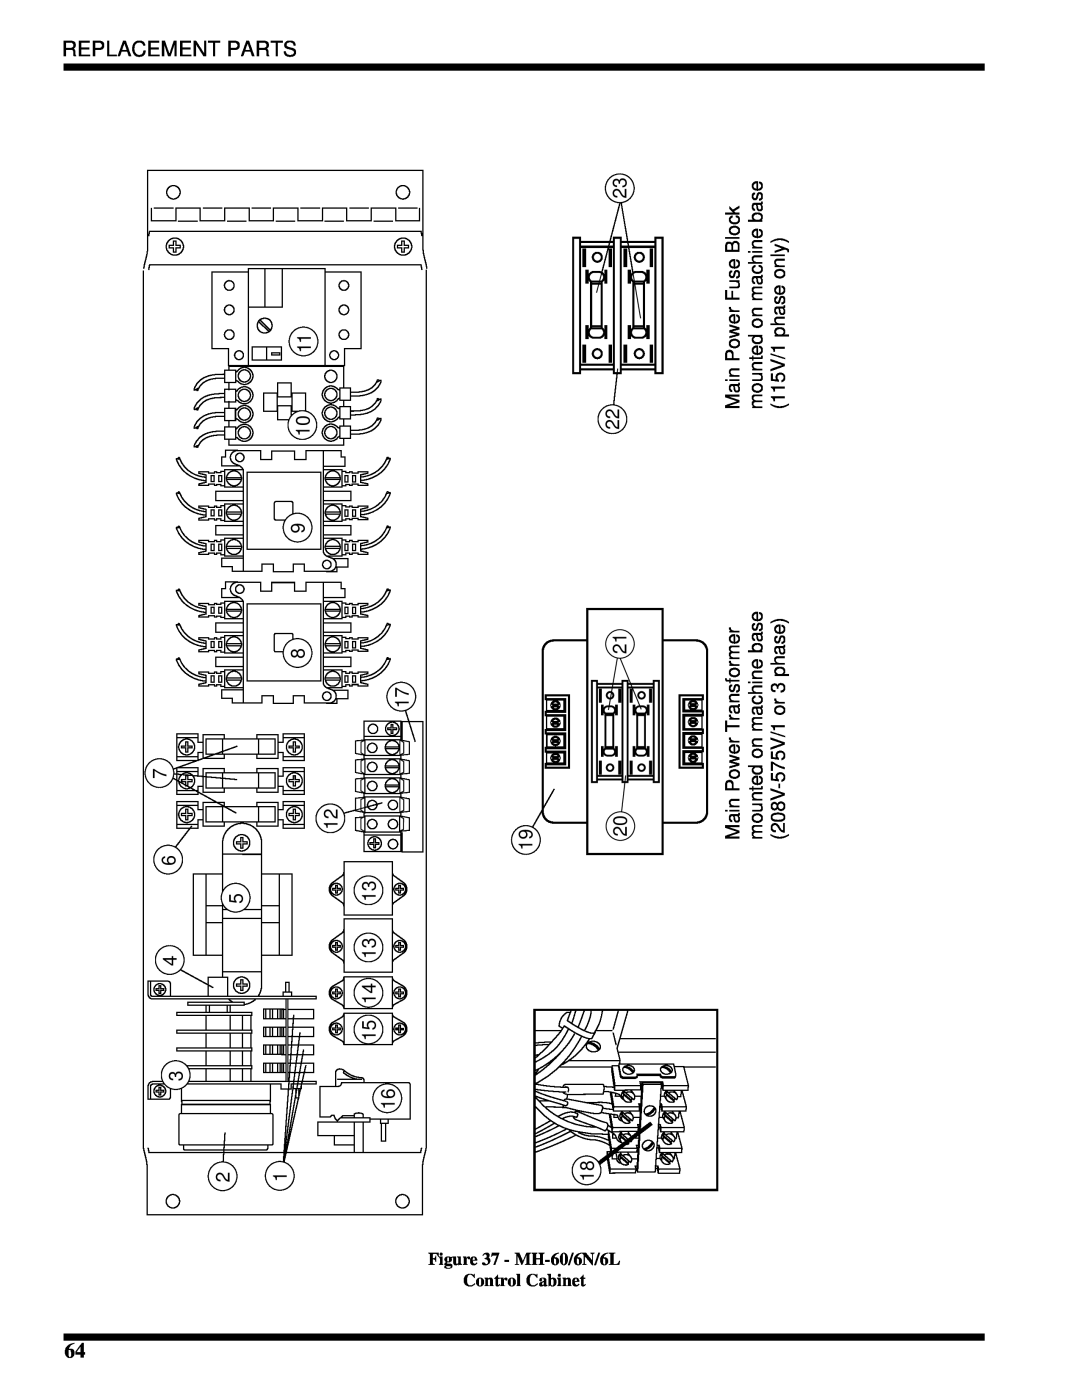 Moyer Diebel MH-6NM3, MH-6LM3, MH-60M3 technical manual Replacement Parts, MH-60/6N/6L Control Cabinet 